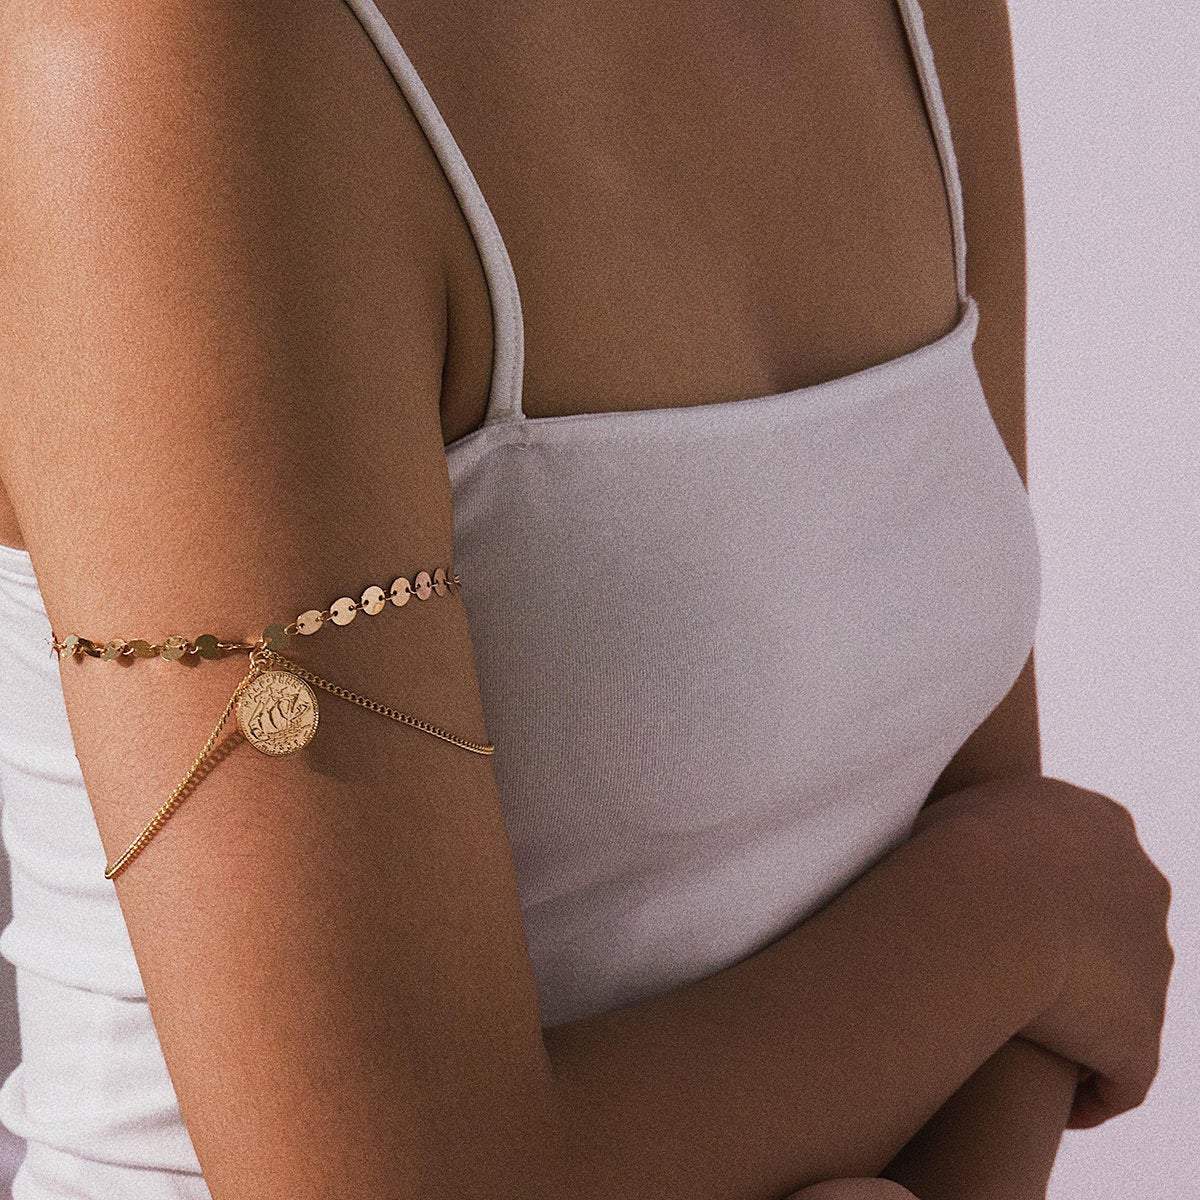 Minimalist Layered Relief Coin Pendant Sequins Arm Cuff - Chic Gold Silver Tone Sequins Chain Cuff Bracelet - Layered Upper Arm Band - ArtGalleryZen